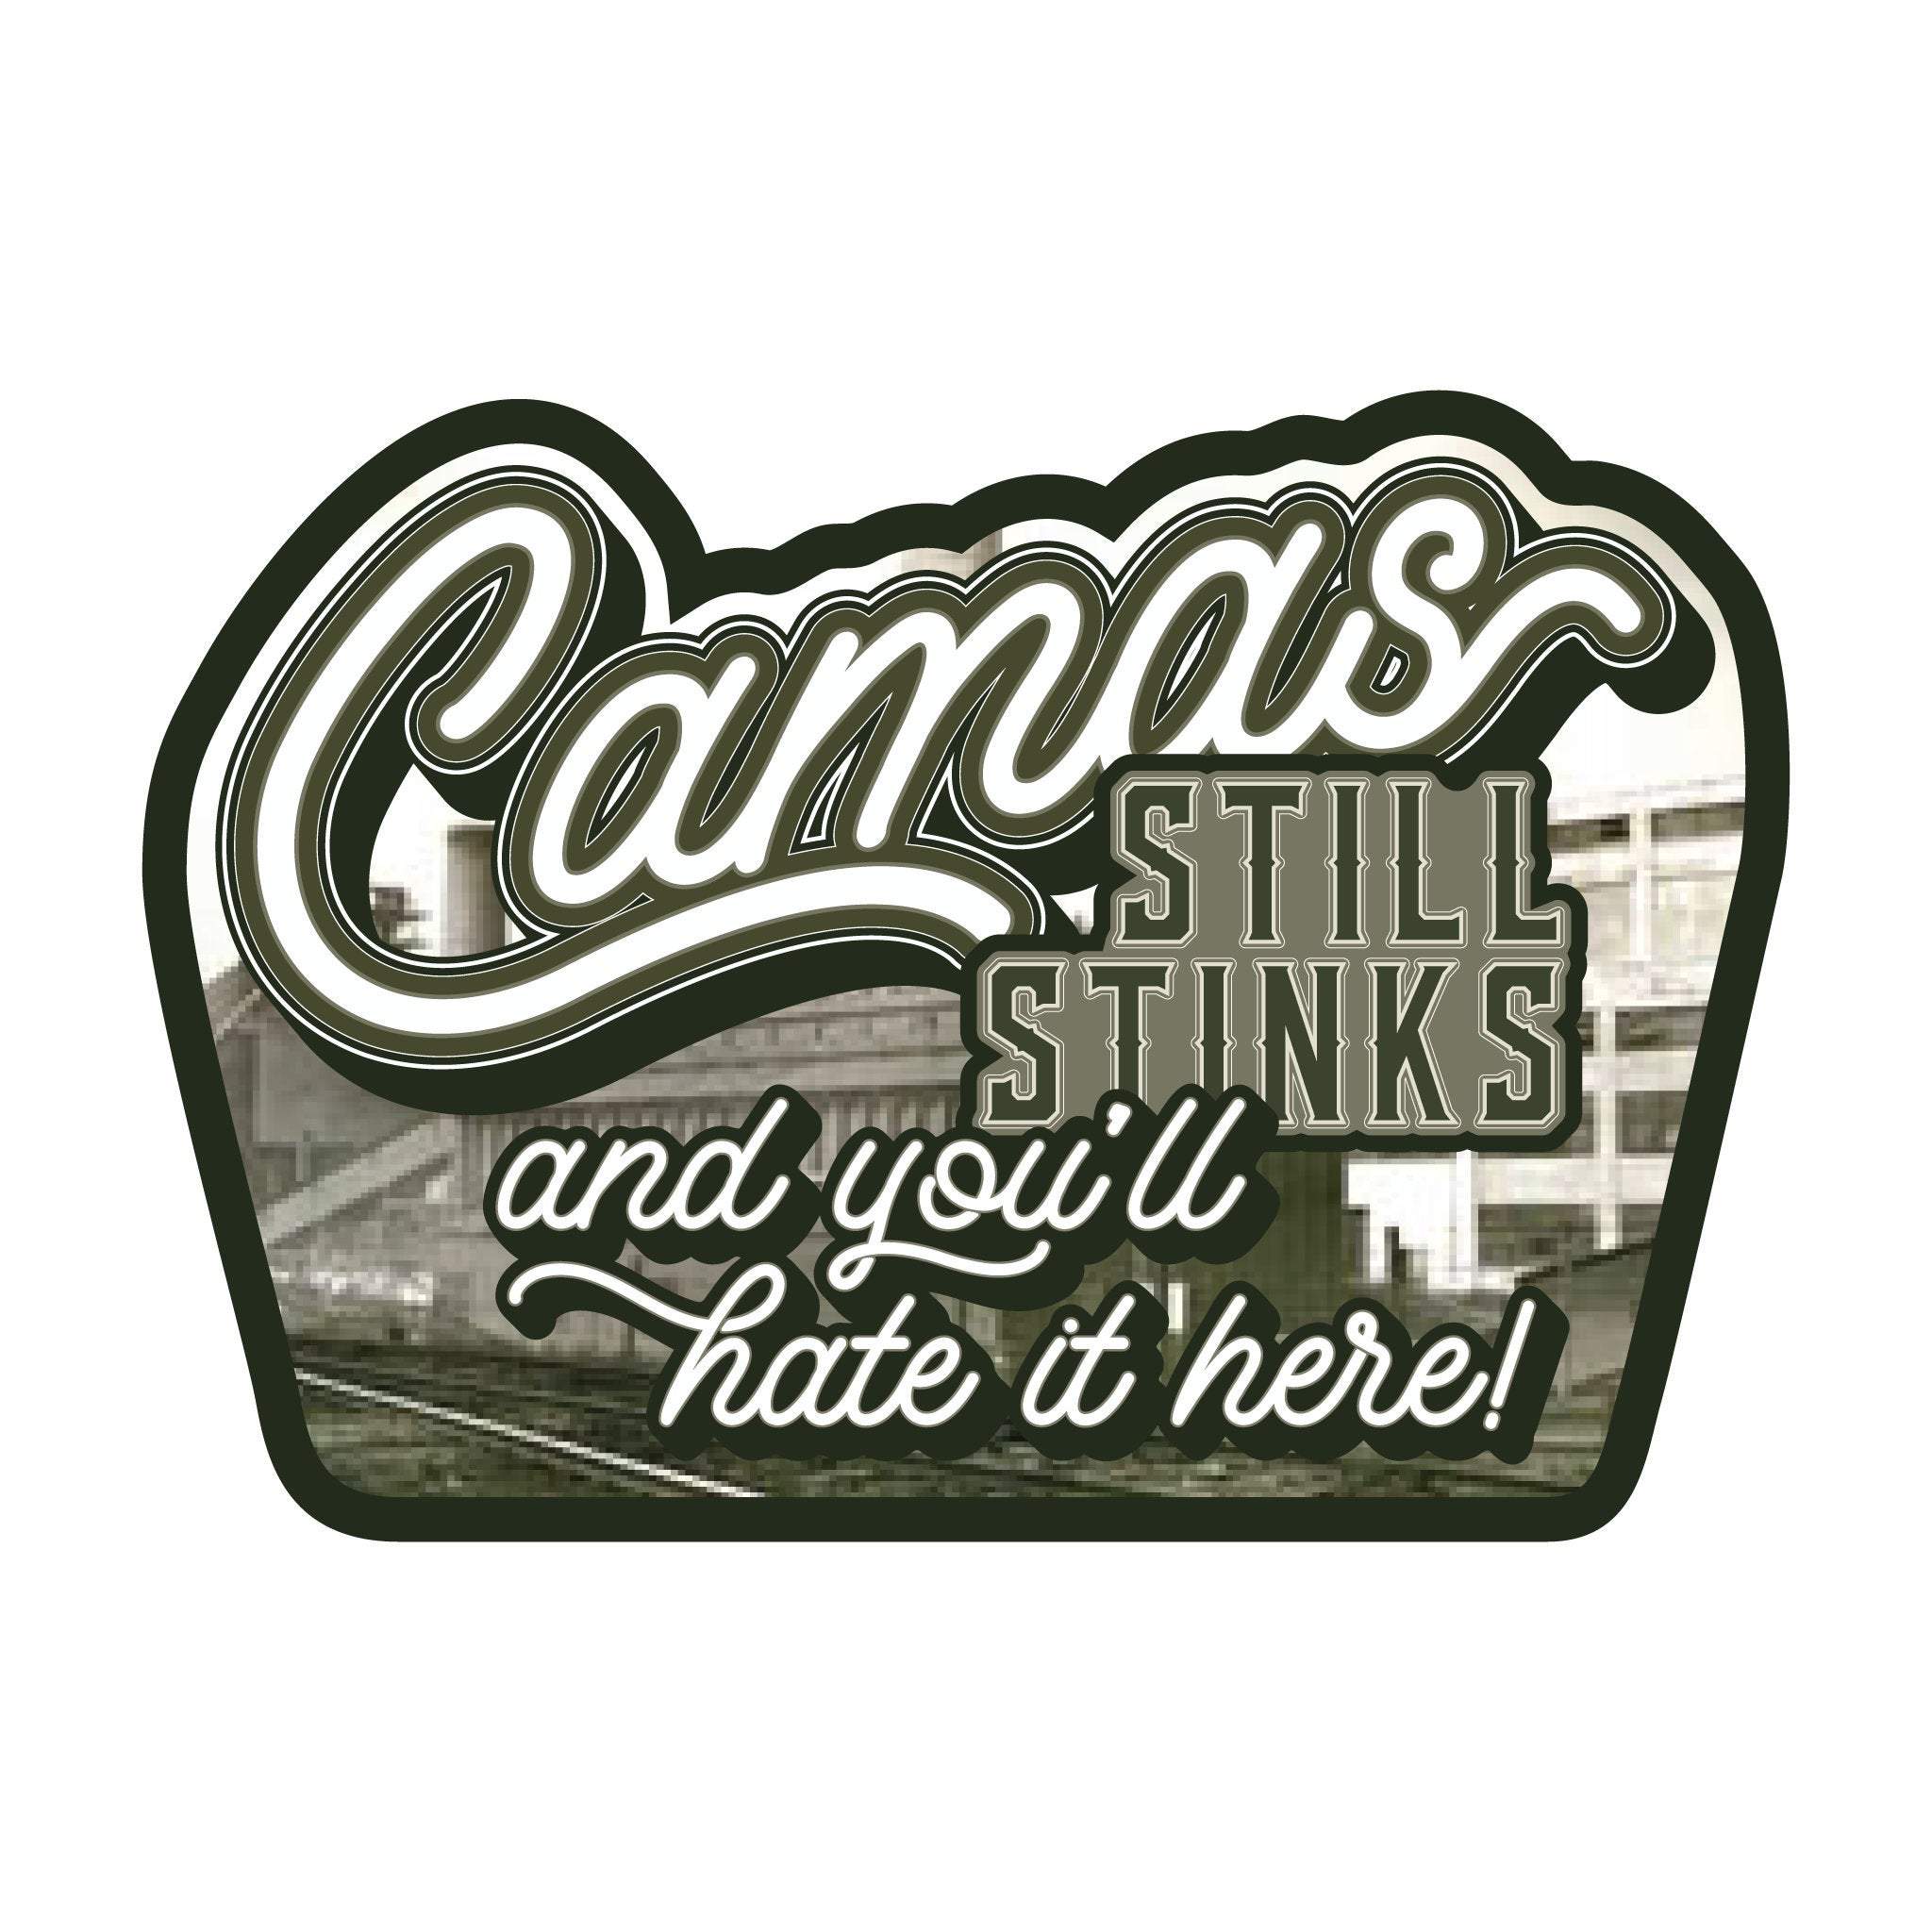 Camas Still Stinks And You'll Hate It Here Decal - Camas Decal, Laptop Decal, Car Decal - Dukes Decals